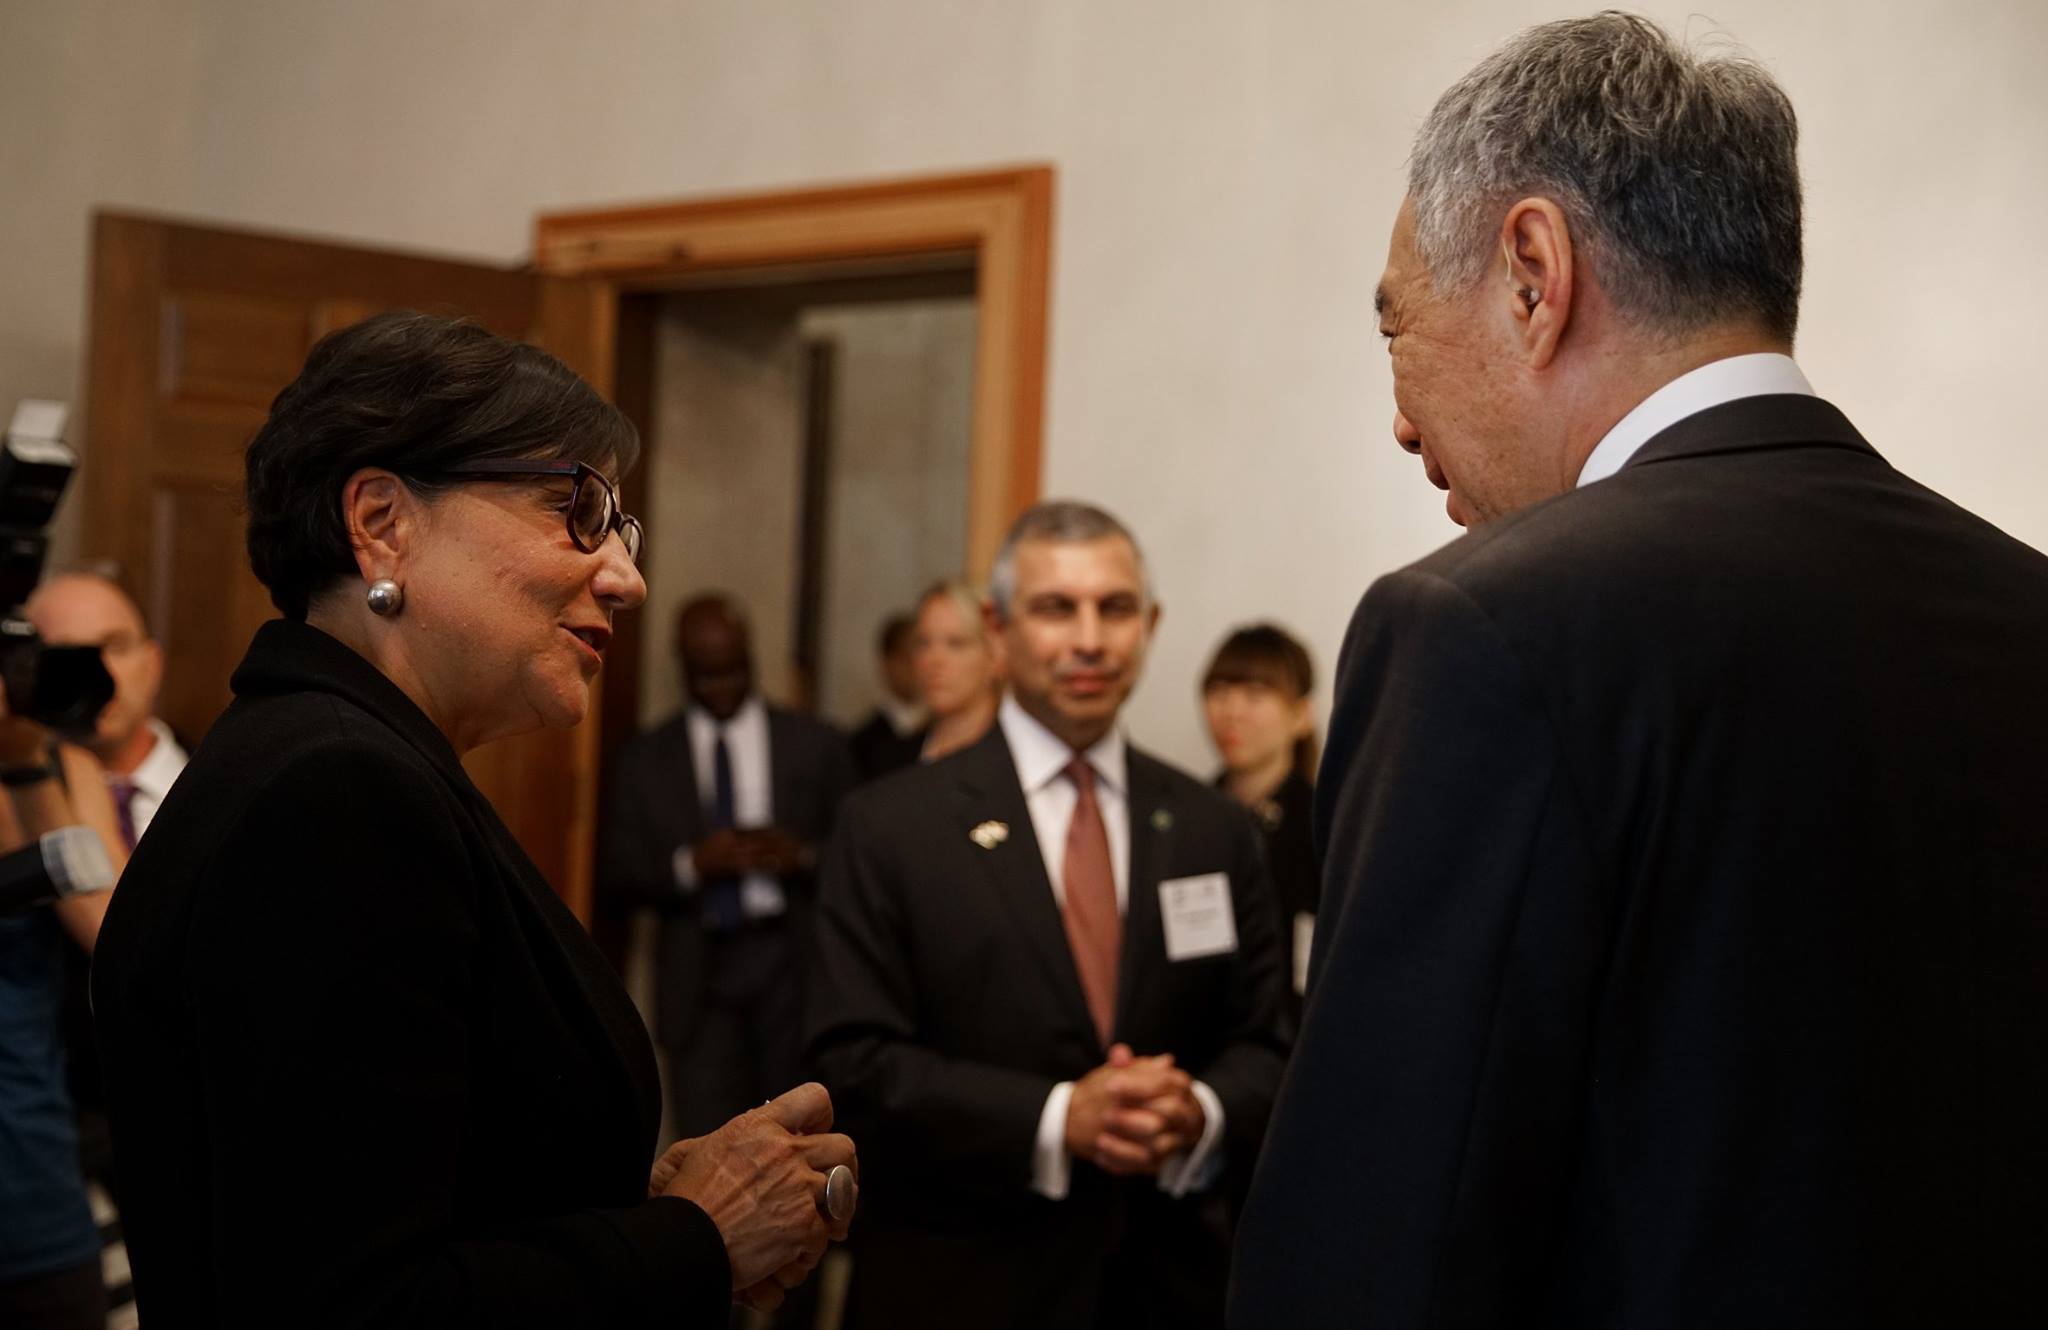 Chatting with Secretary of Commerce Penny Pritzker at the U.S. Chamber of Commerce. Source: Lee Hsien Loong Facebook